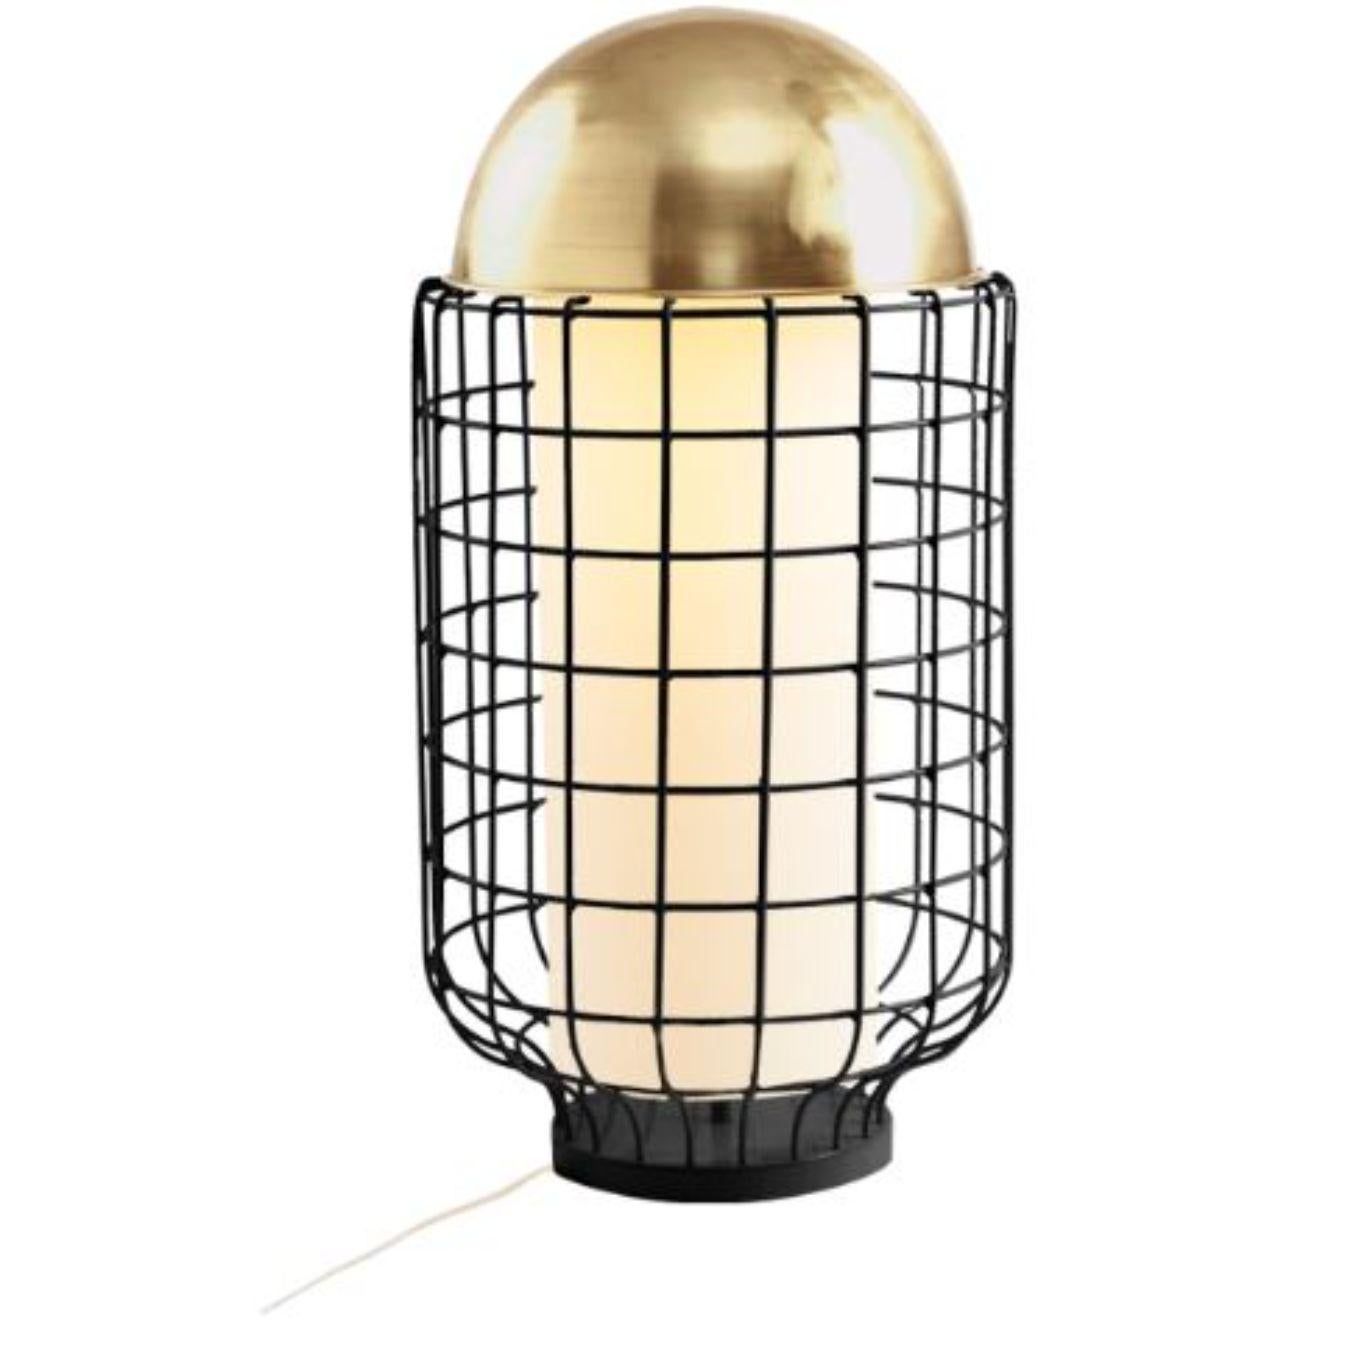 Brass Magnolia table lamp by Dooq
Dimensions: W 32 x D 32 x H 63 cm
Materials: lacquered metal, polished or brushed metal, brass.
abat-jour: cotton
Also available in different colours and materials.

Information:
230V/50Hz
E27/1x10W